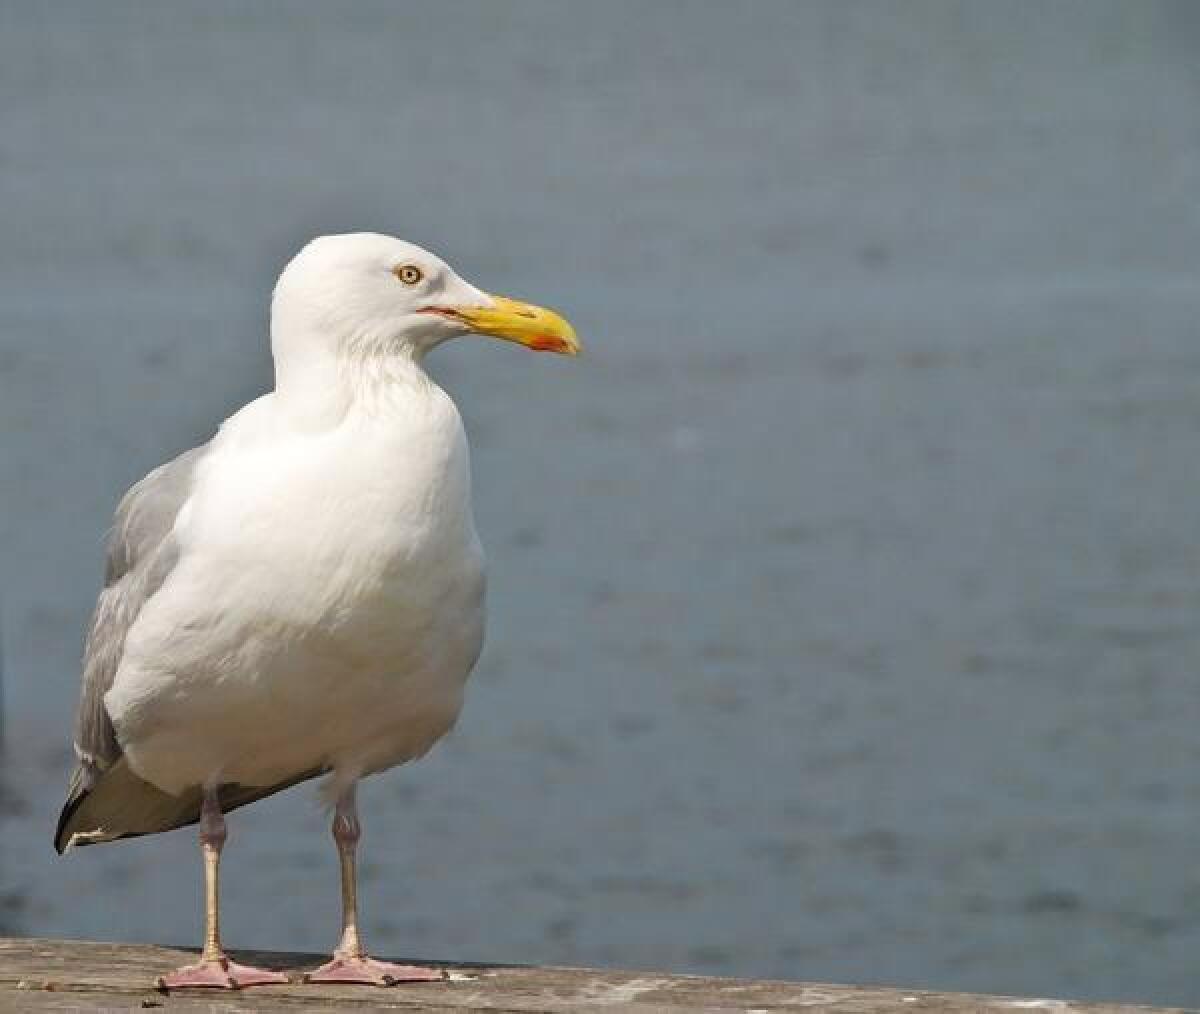 Gulls are protected by the Migratory Bird Treaty Act.